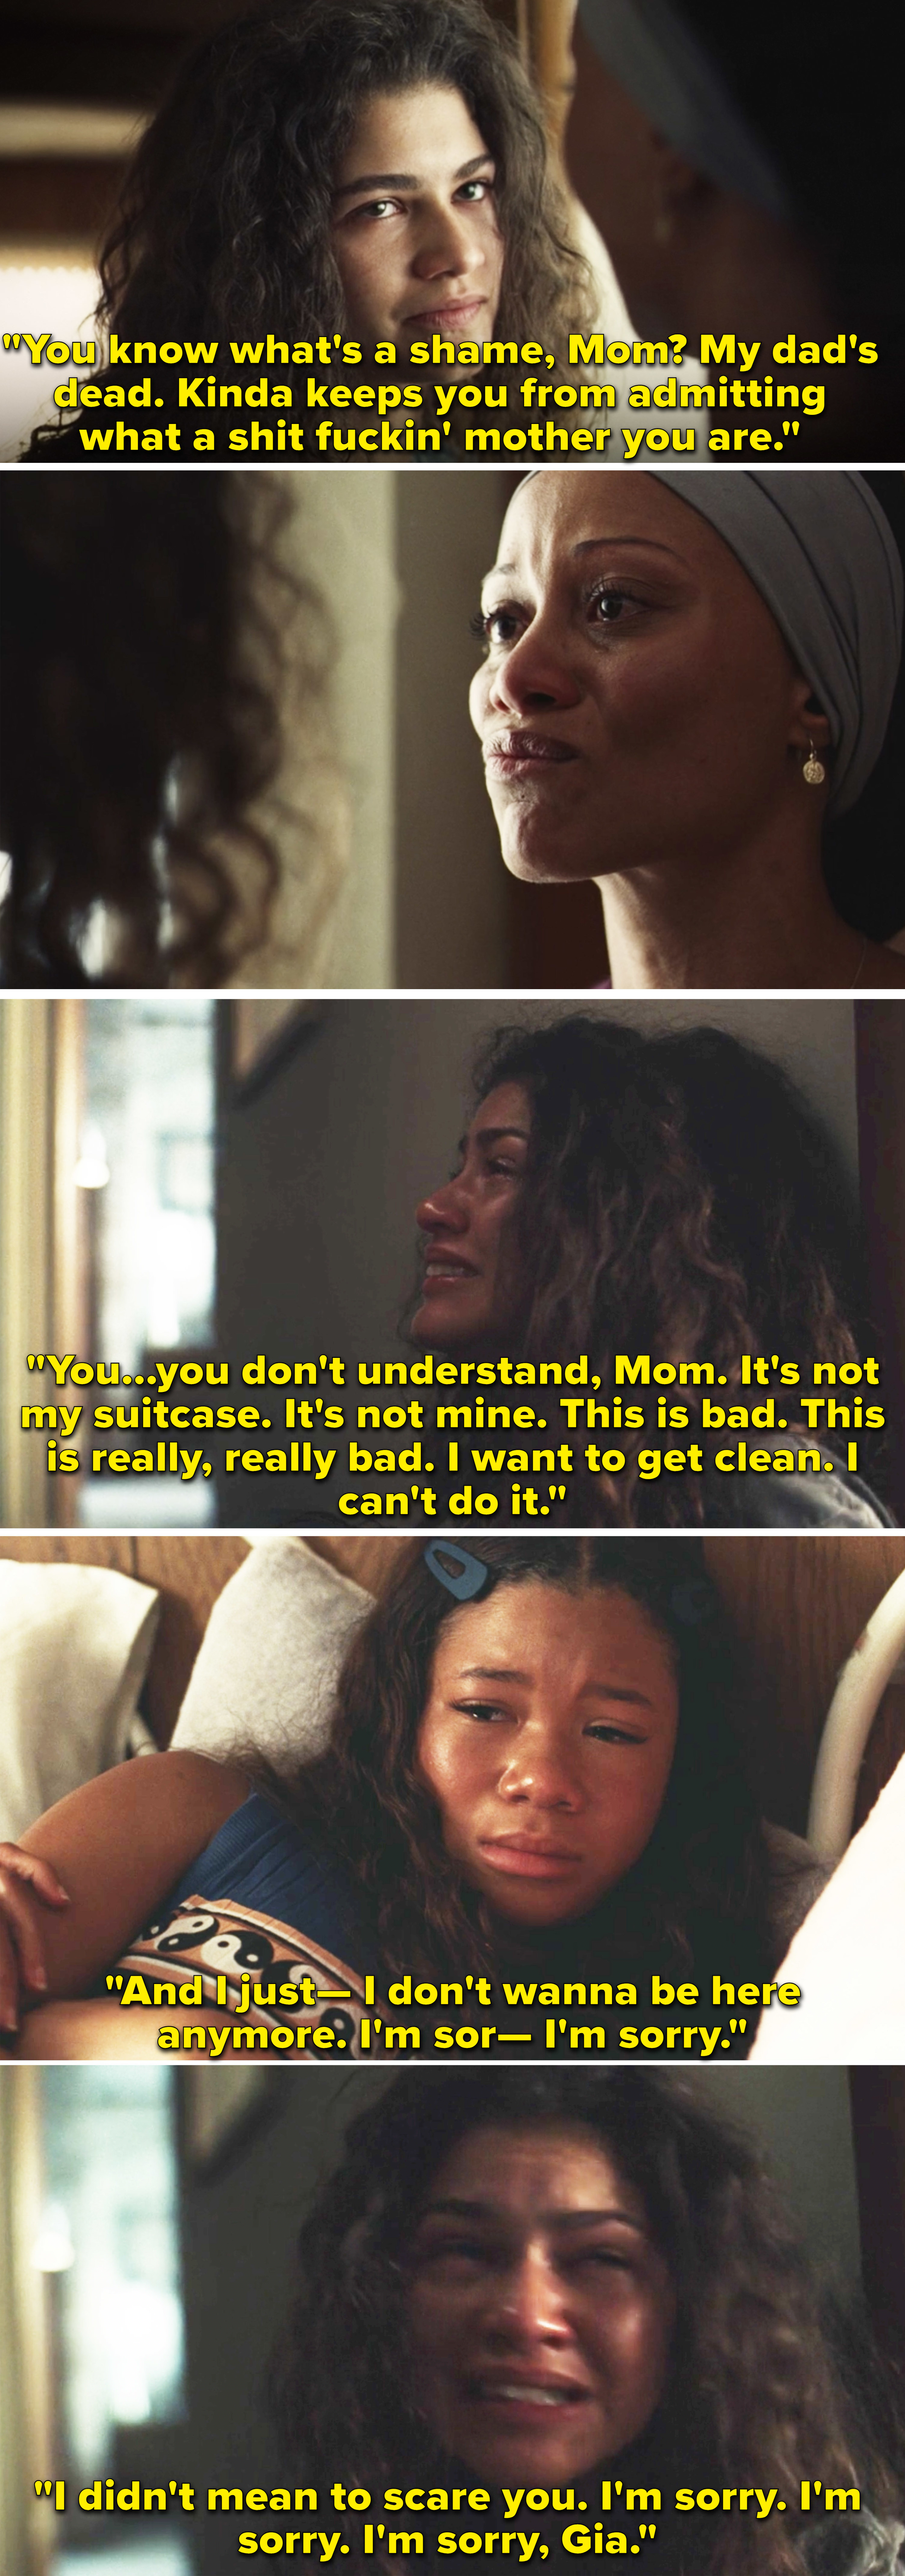 Rue telling her mother what a &quot;shit&quot; mother she is and that the missing suitcase isn&#x27;t hers and it&#x27;s &quot;really, really bad&quot;